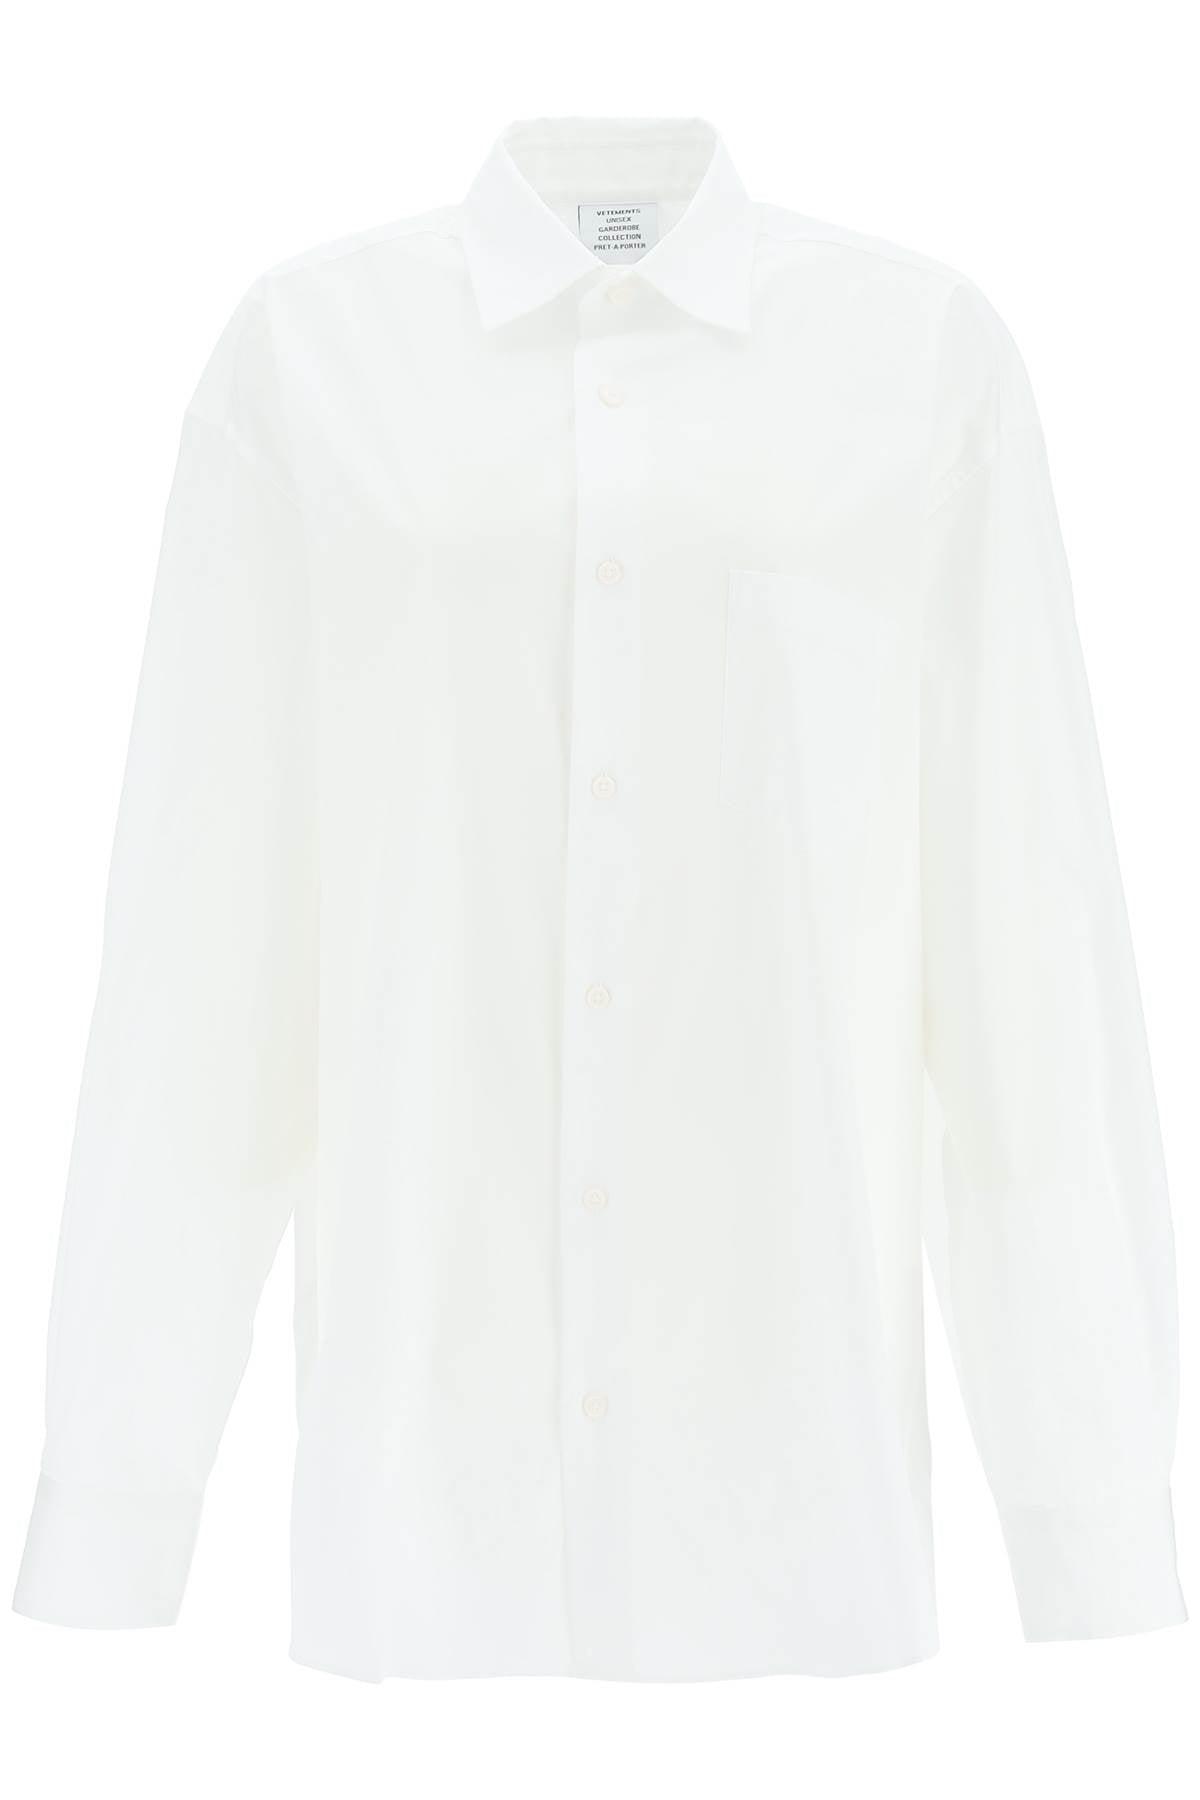 Vetements Oversized Shirt With Back Logo in White | Lyst